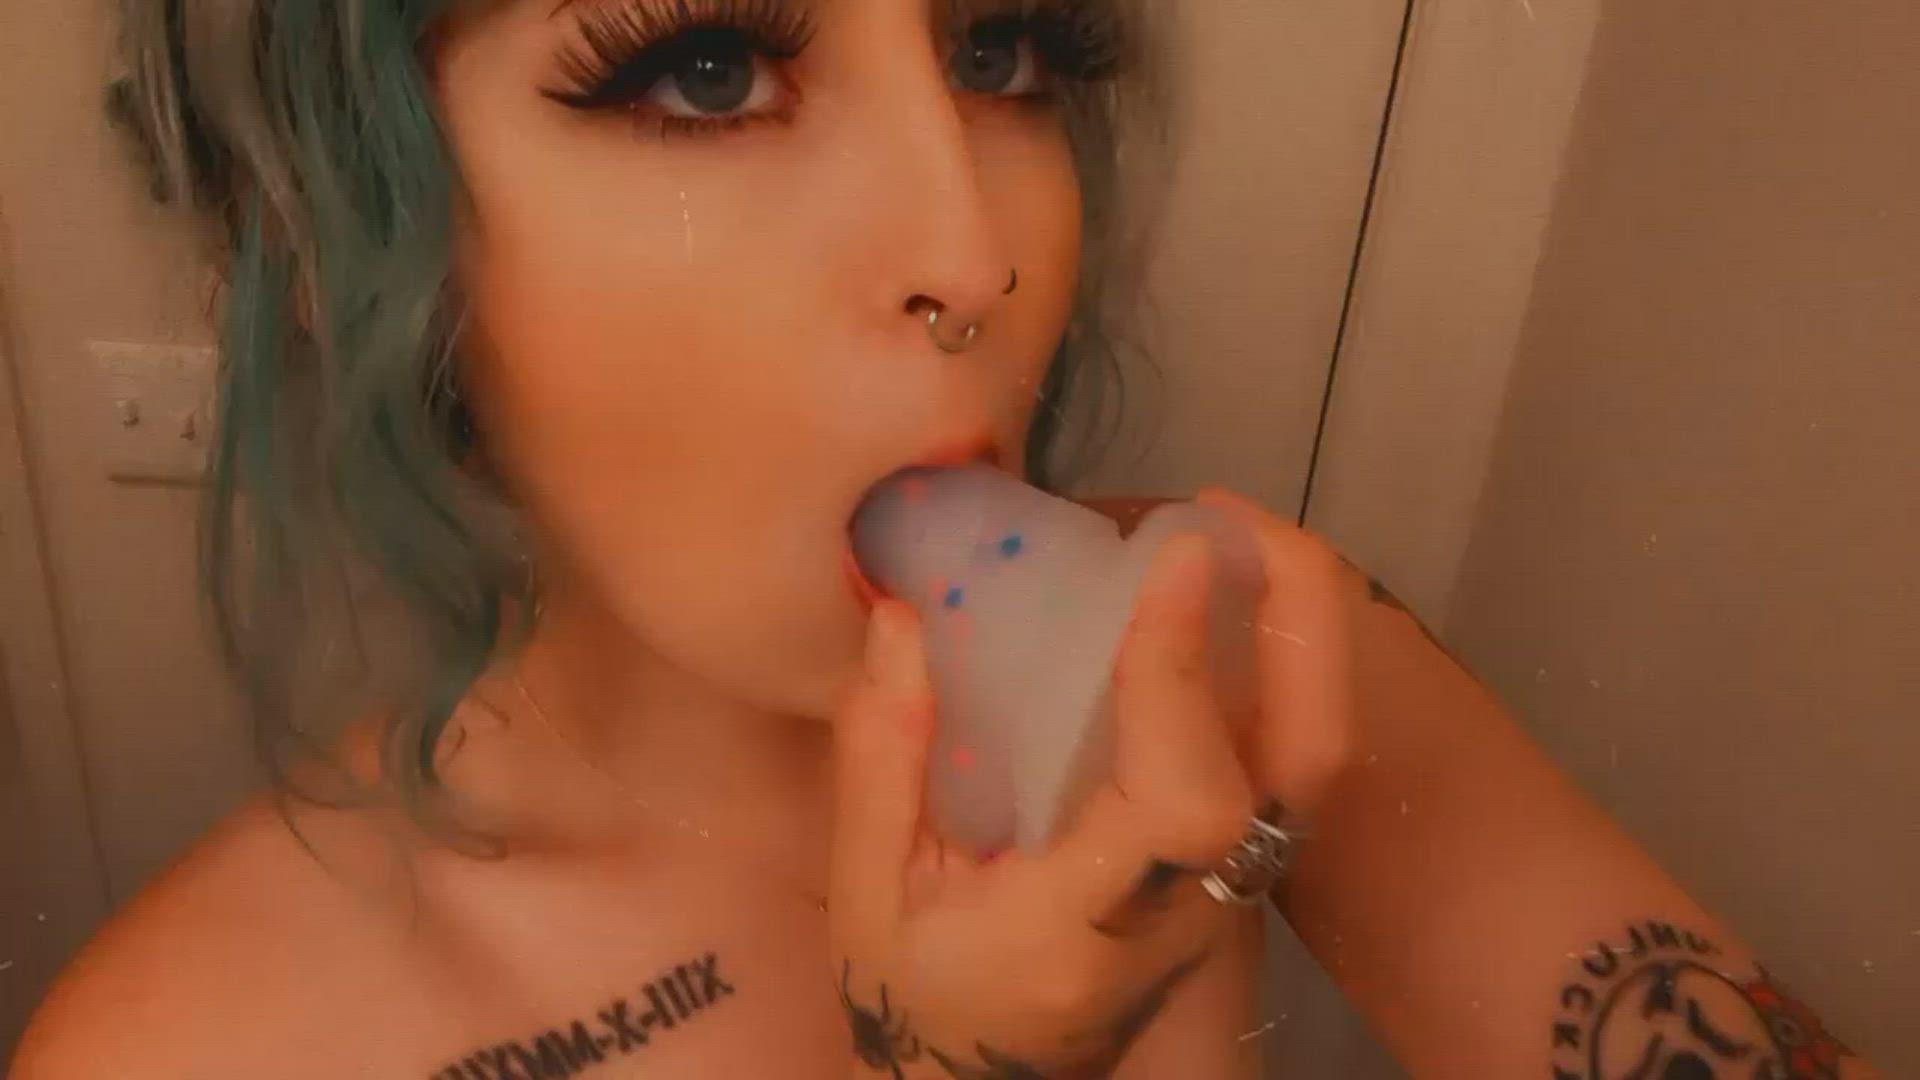 Solo porn video with onlyfans model Sabrina <strong>@littlekittenn</strong>